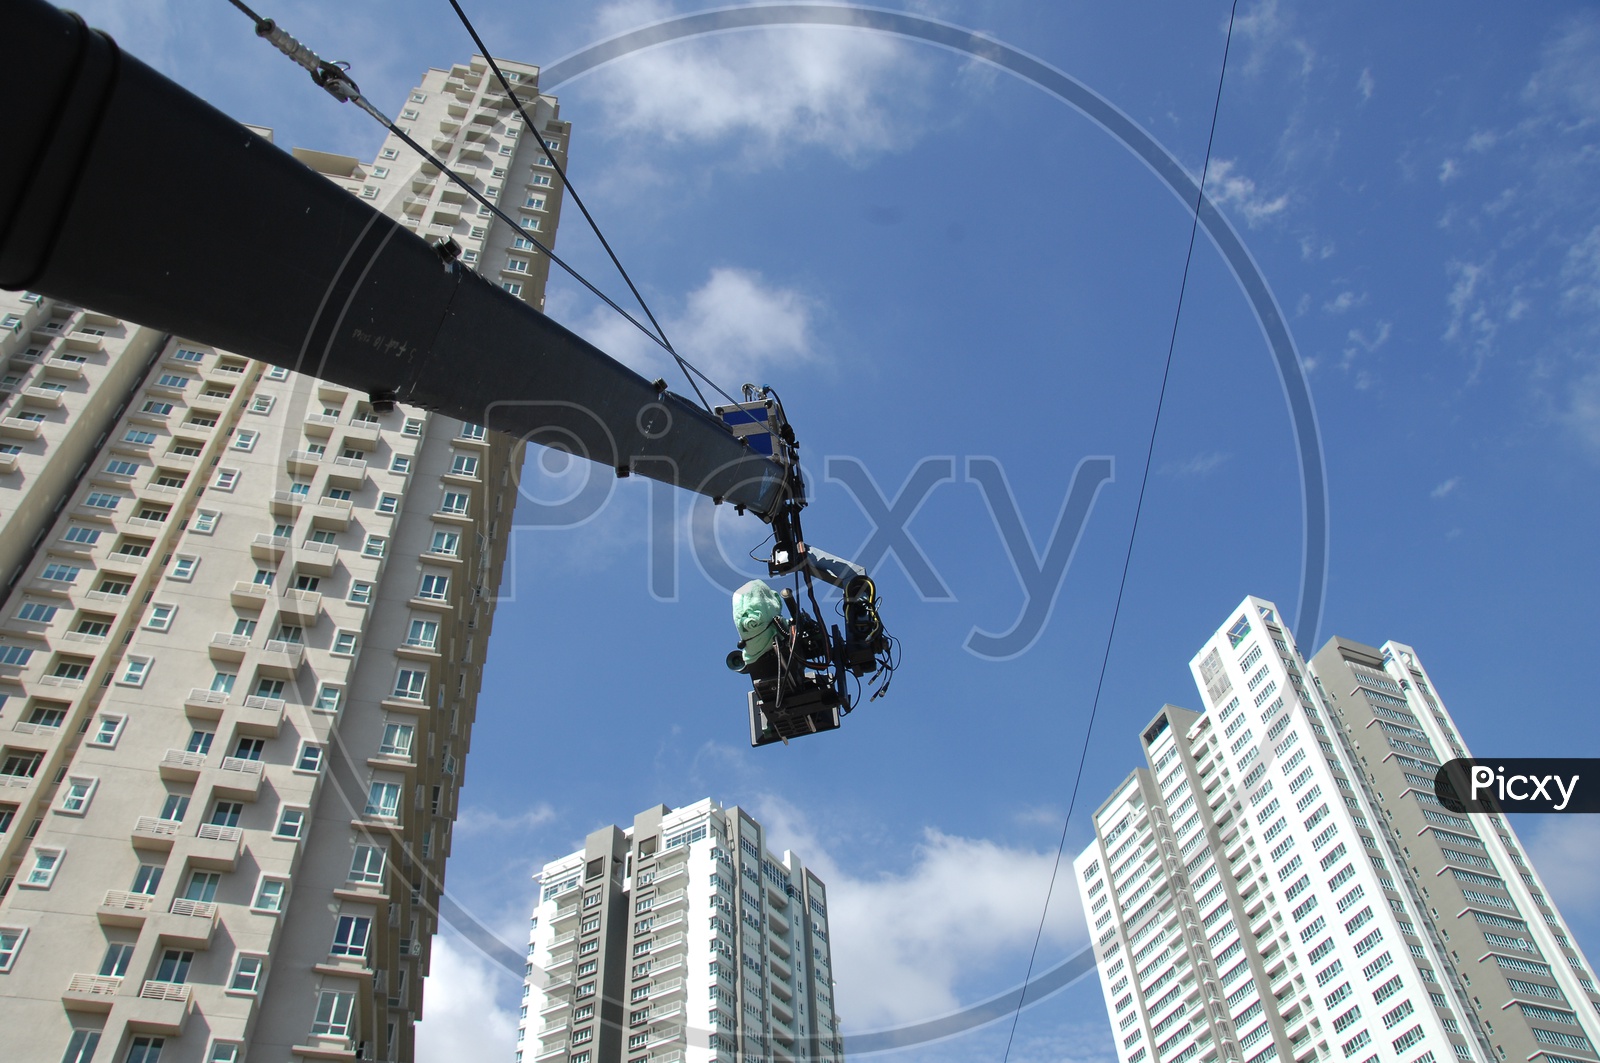 A Movie Shooting Video Camera Fitted To a Crane